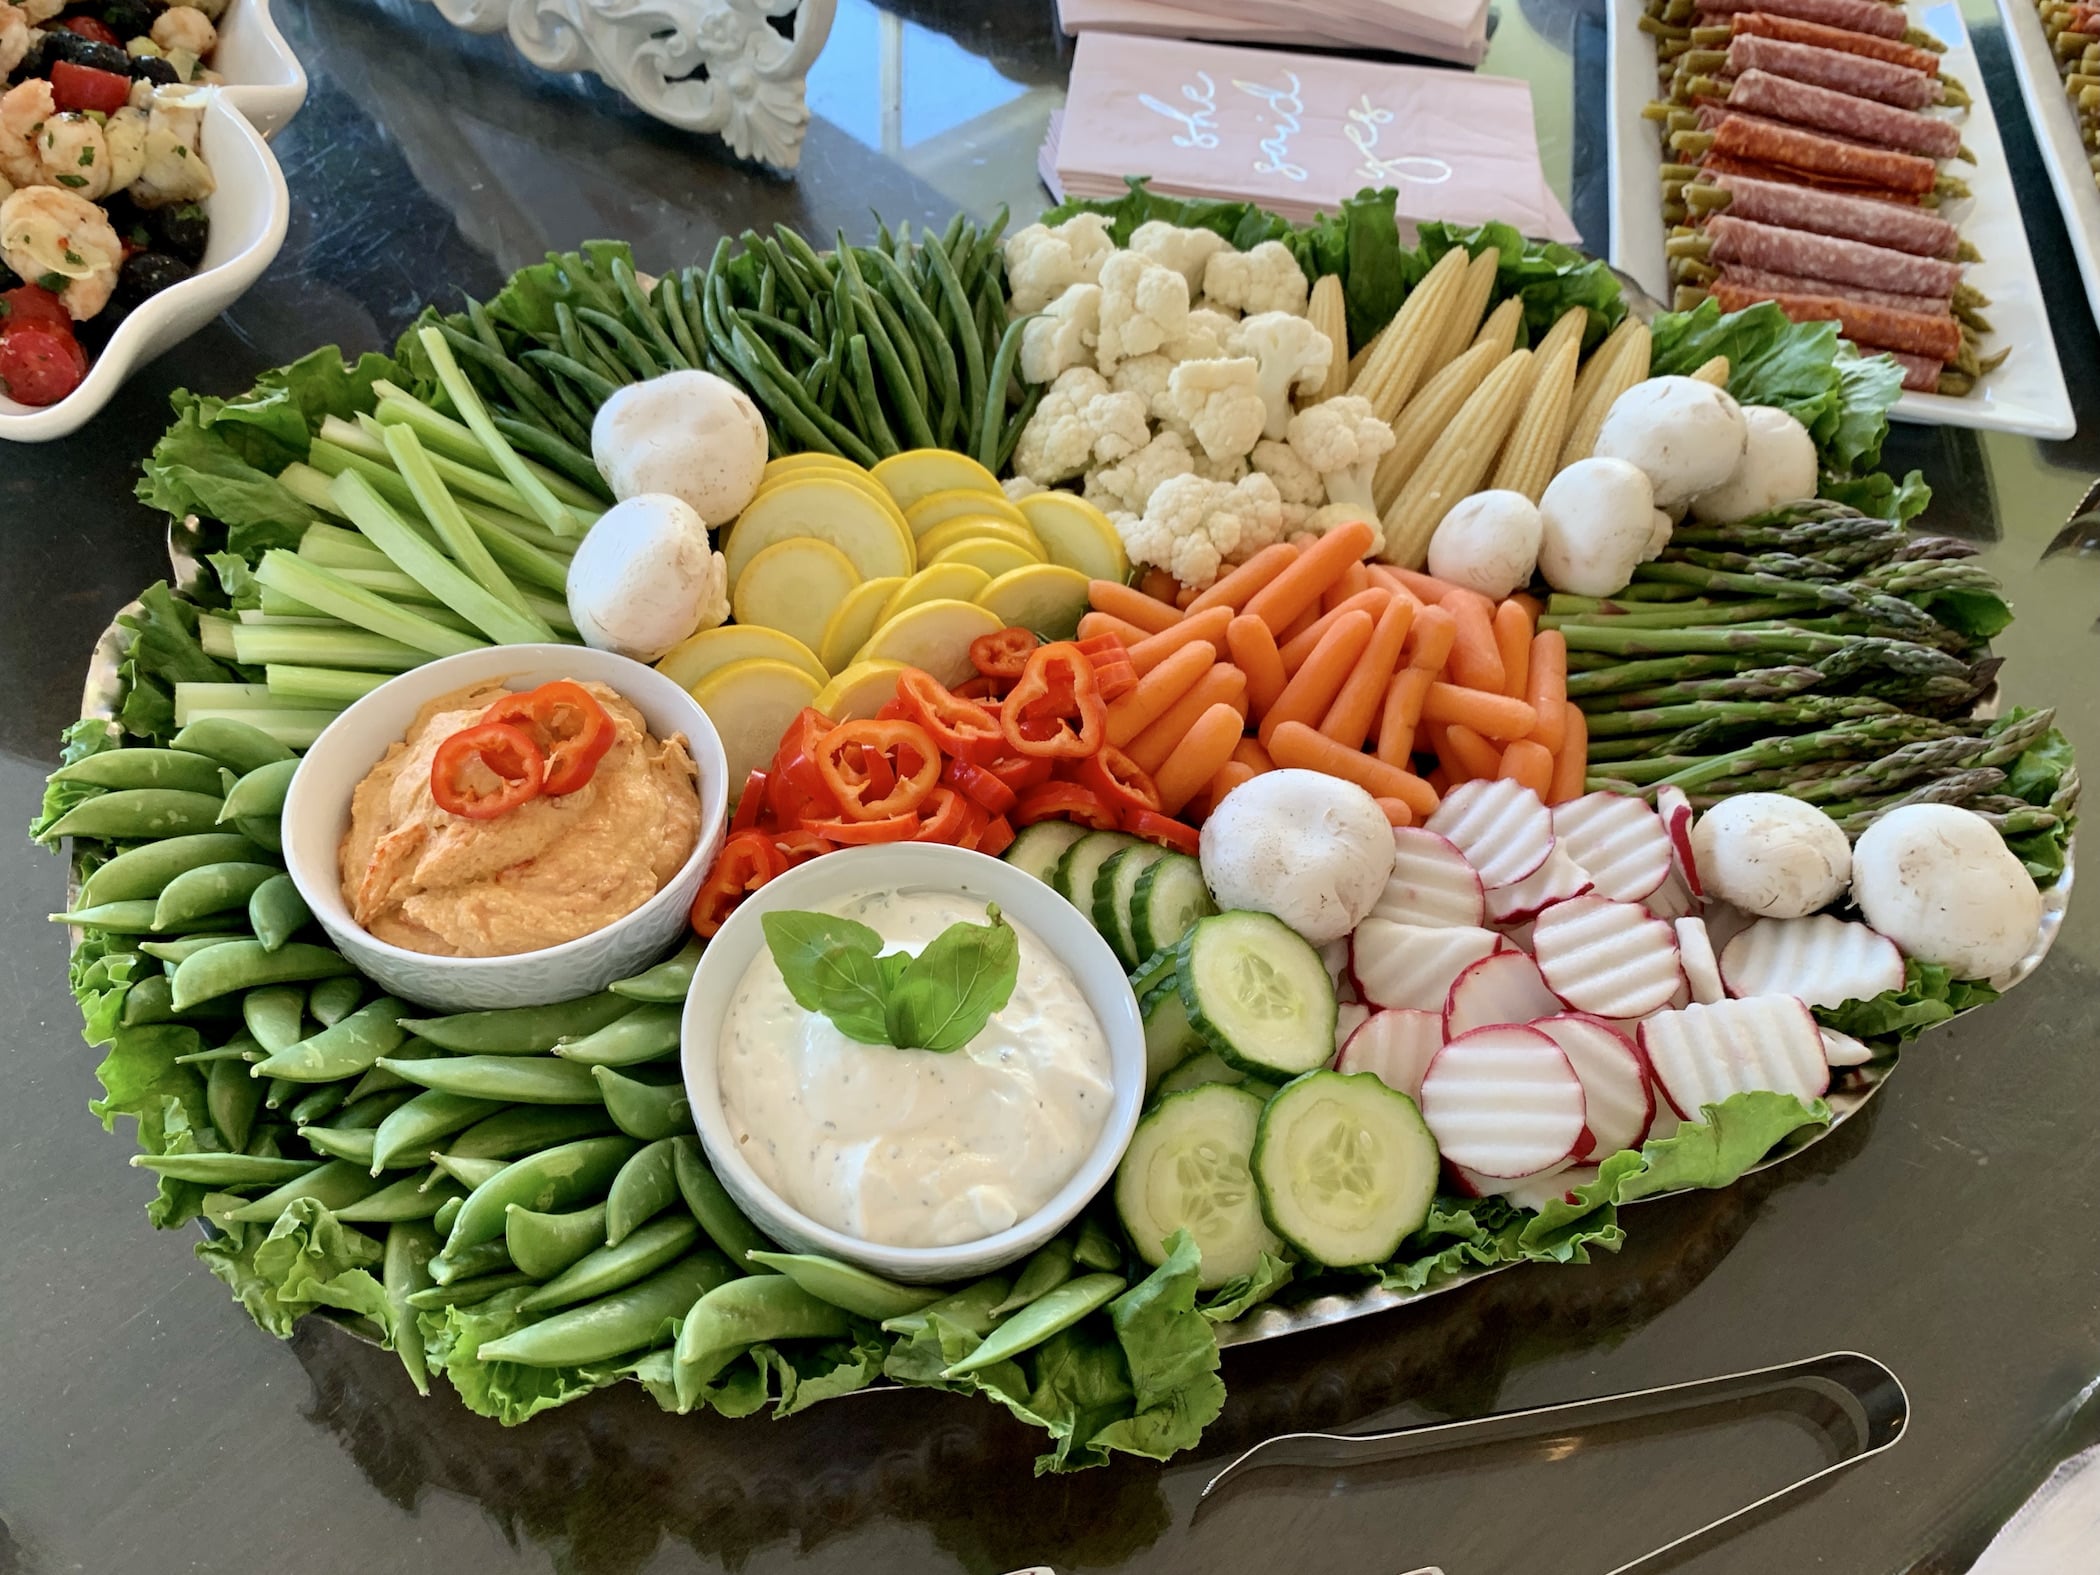 Fresh seasonal vegetables accompanied by assorted dipping sauces. Selection based on finest seasonal ingredients available.